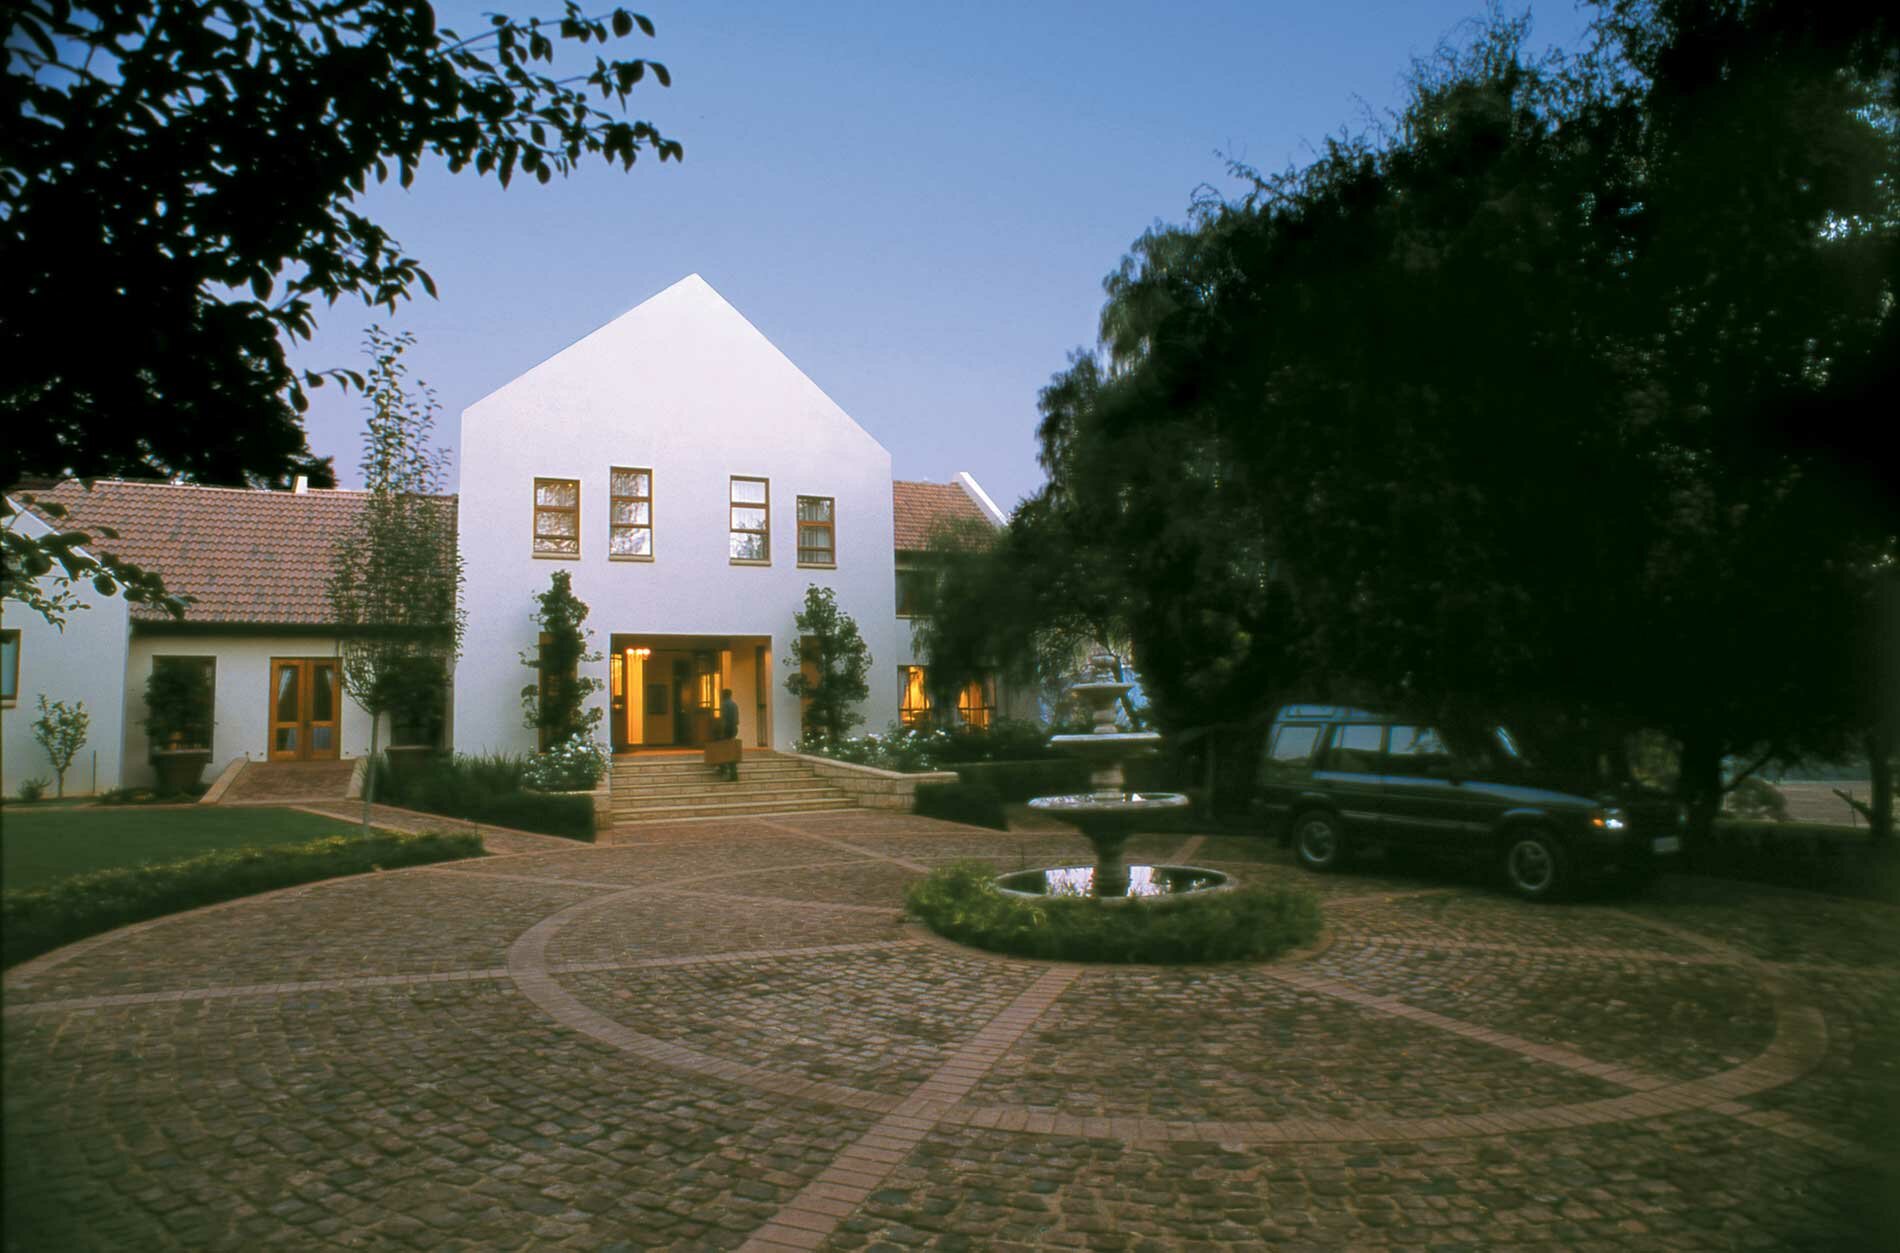 Entrance to the lodge